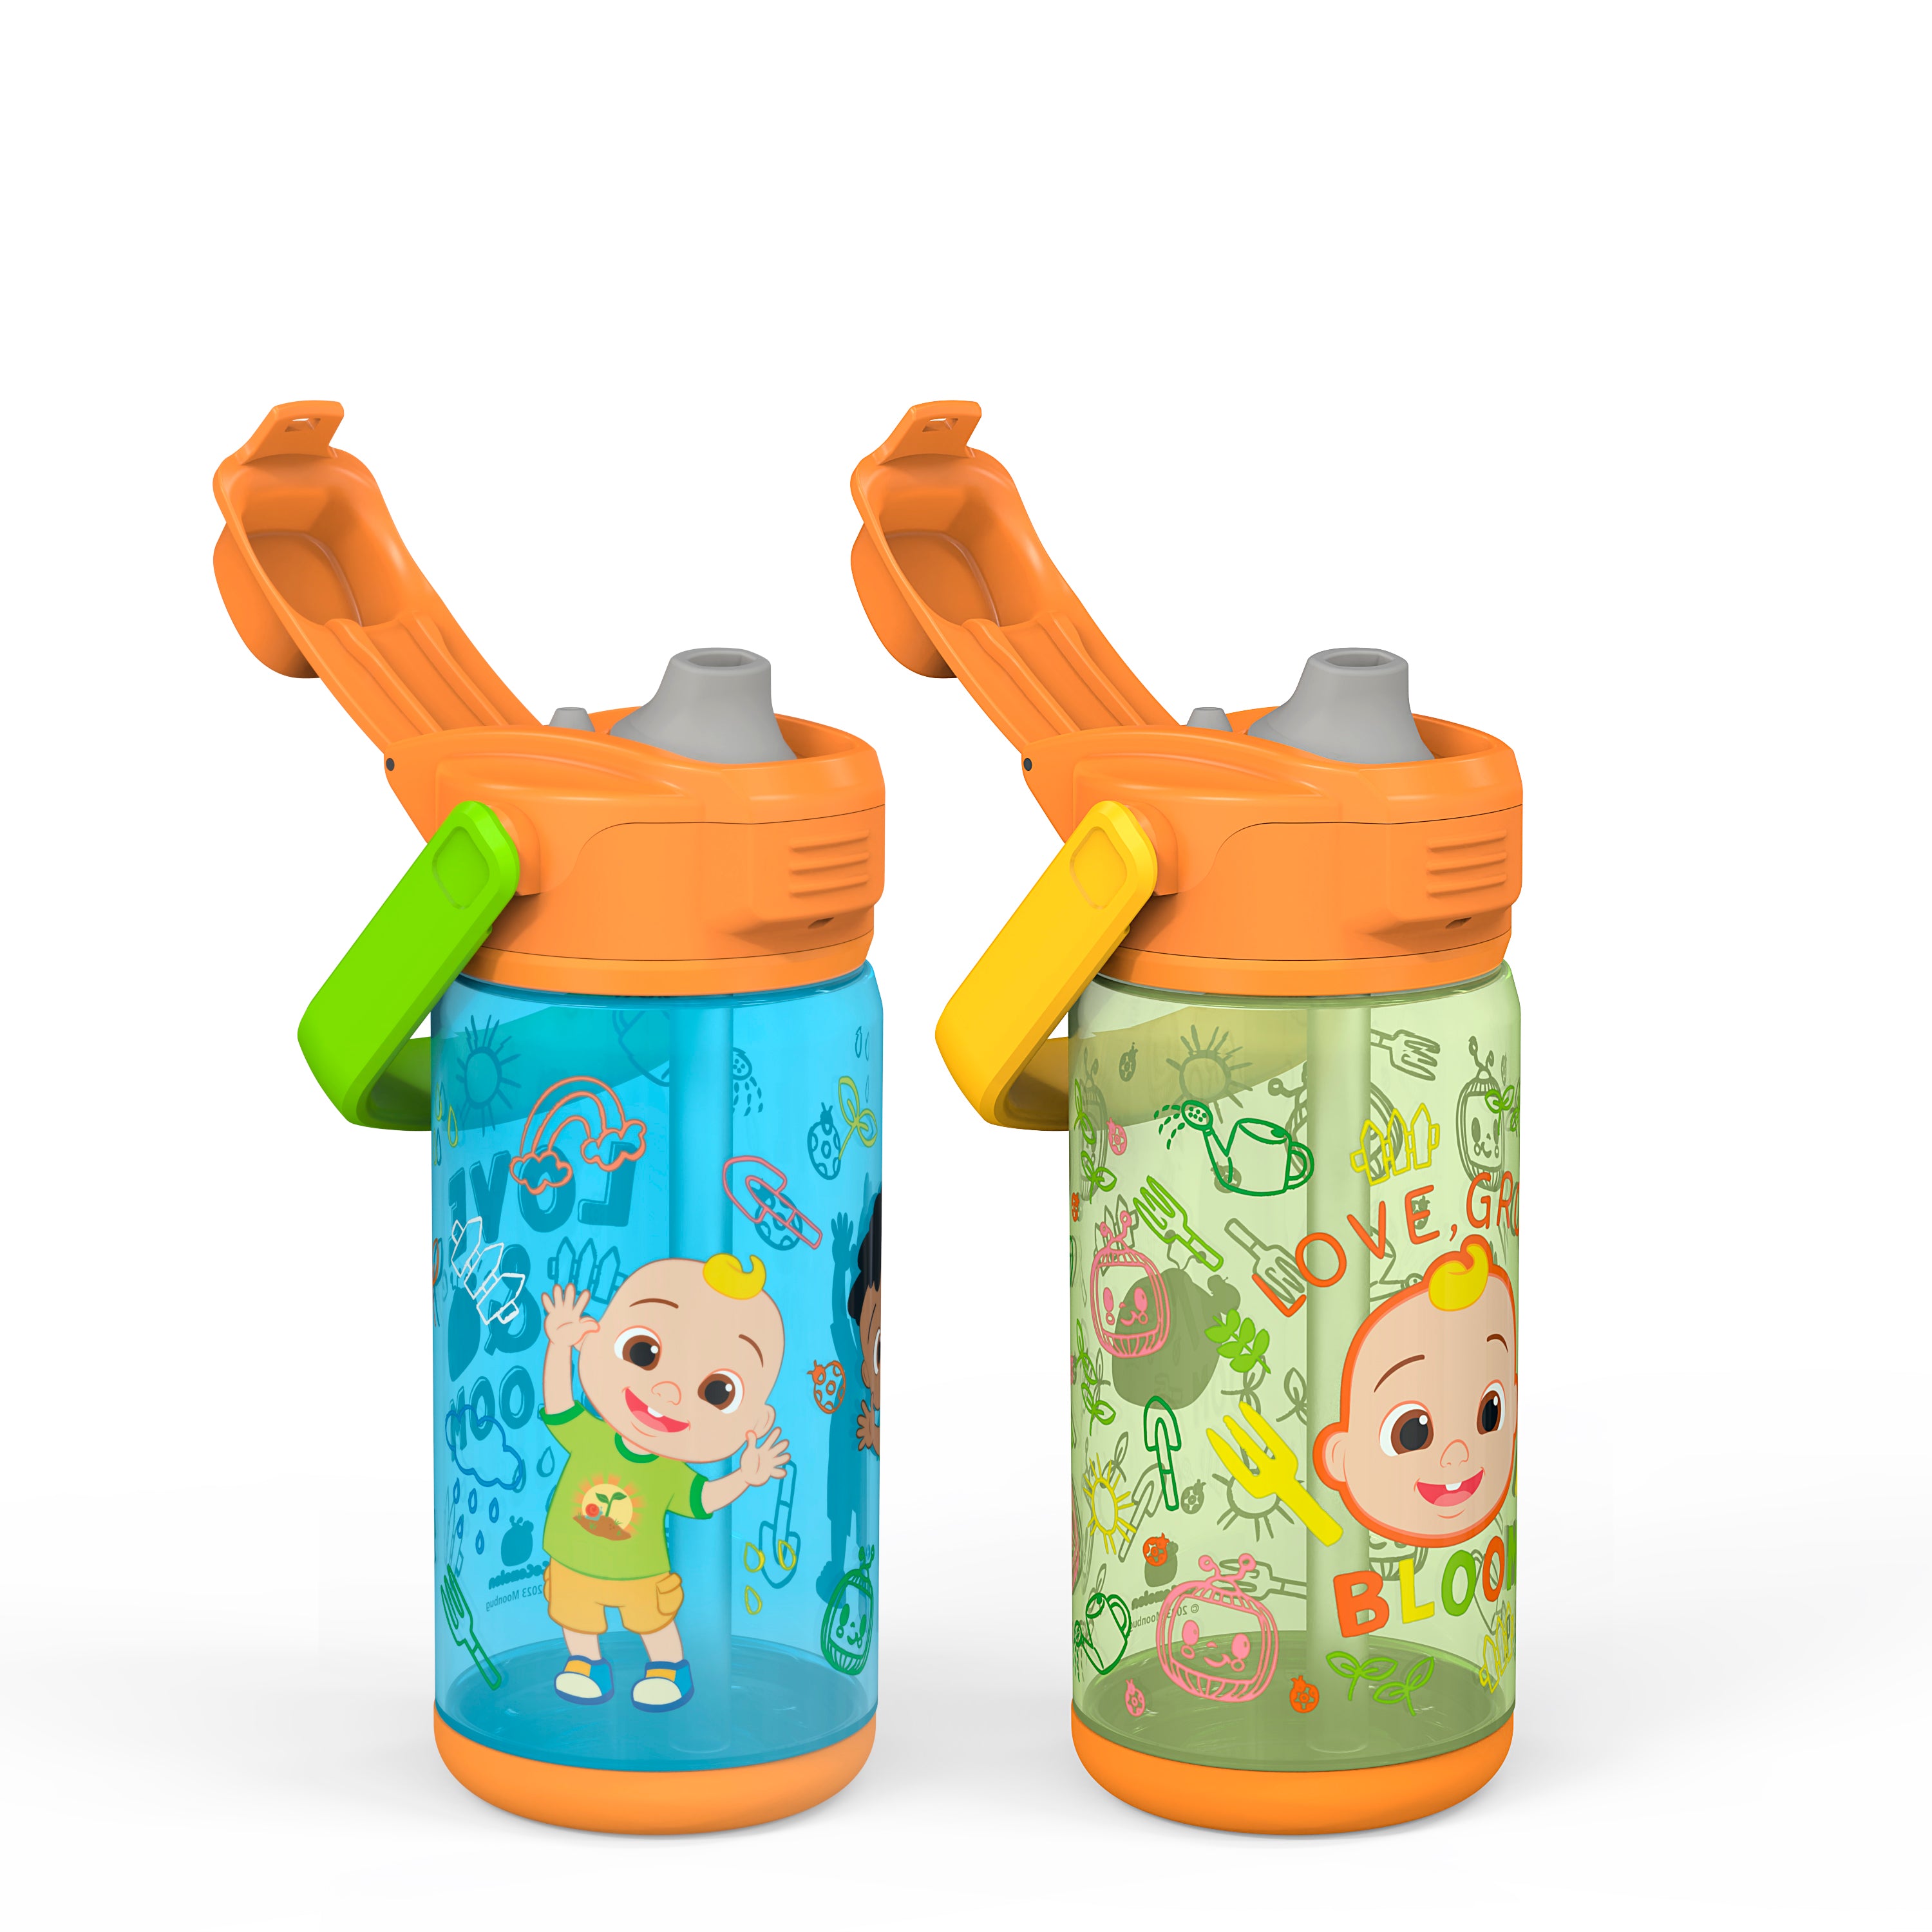 Disney Princess Beacon 2-Piece Kids Water Bottle Set with Covered